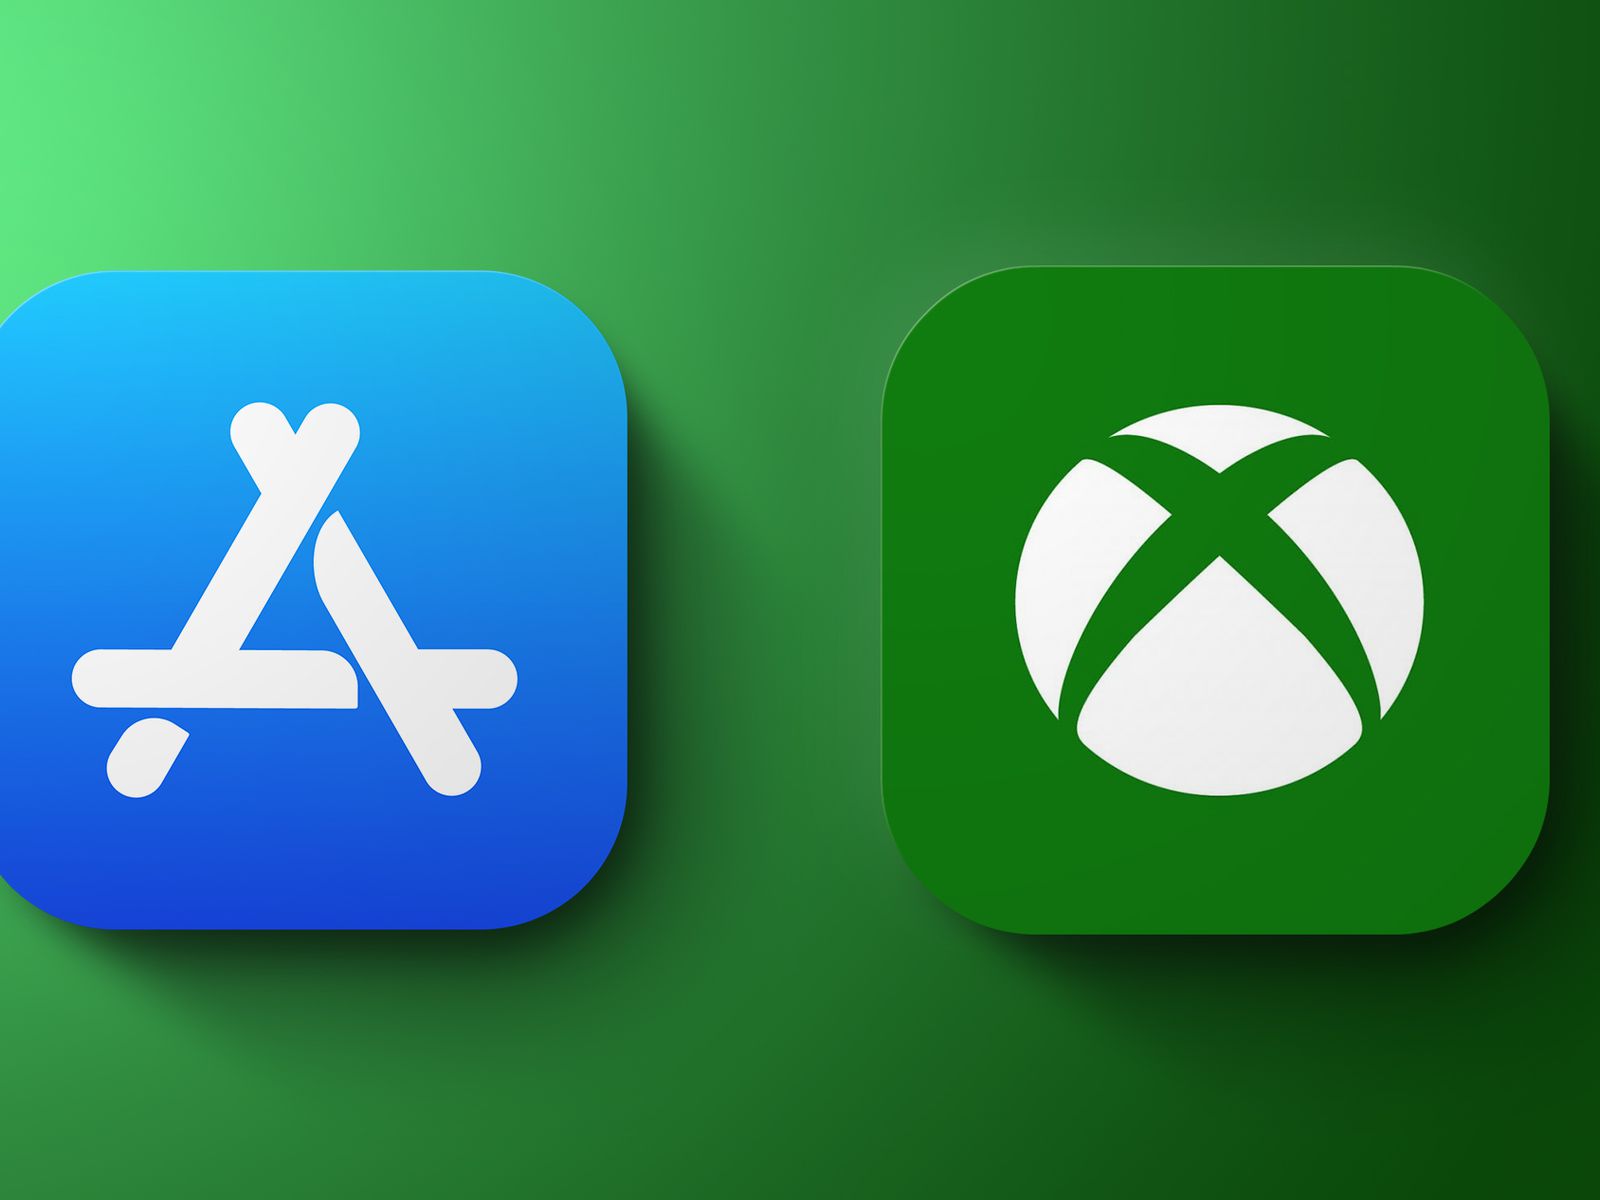 Microsoft updates app to enable iPhone and iPad users to play Xbox games, Science & Tech News